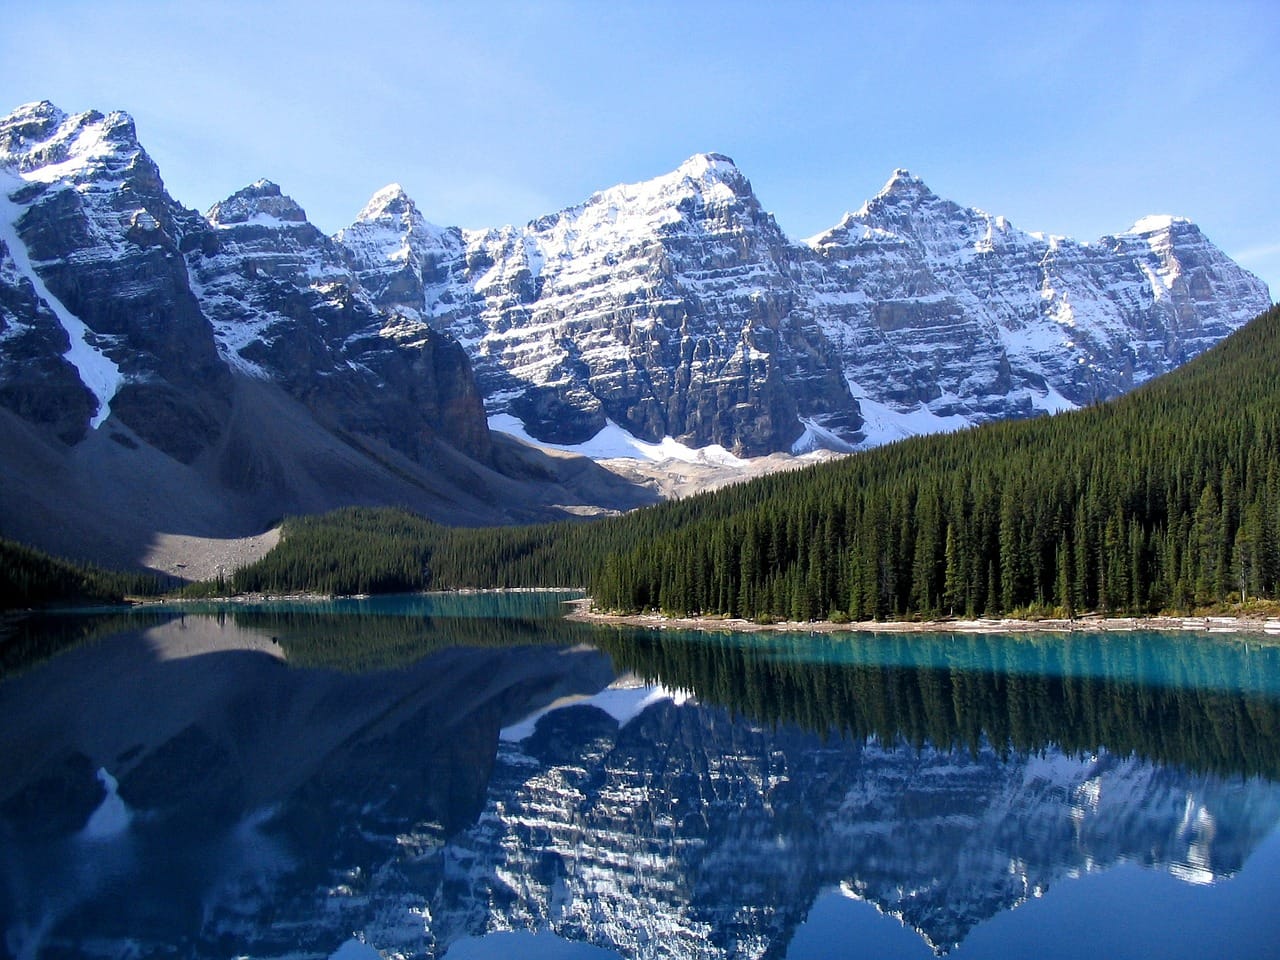 Check out these 10 under-the-radar experiences you can have in Banff